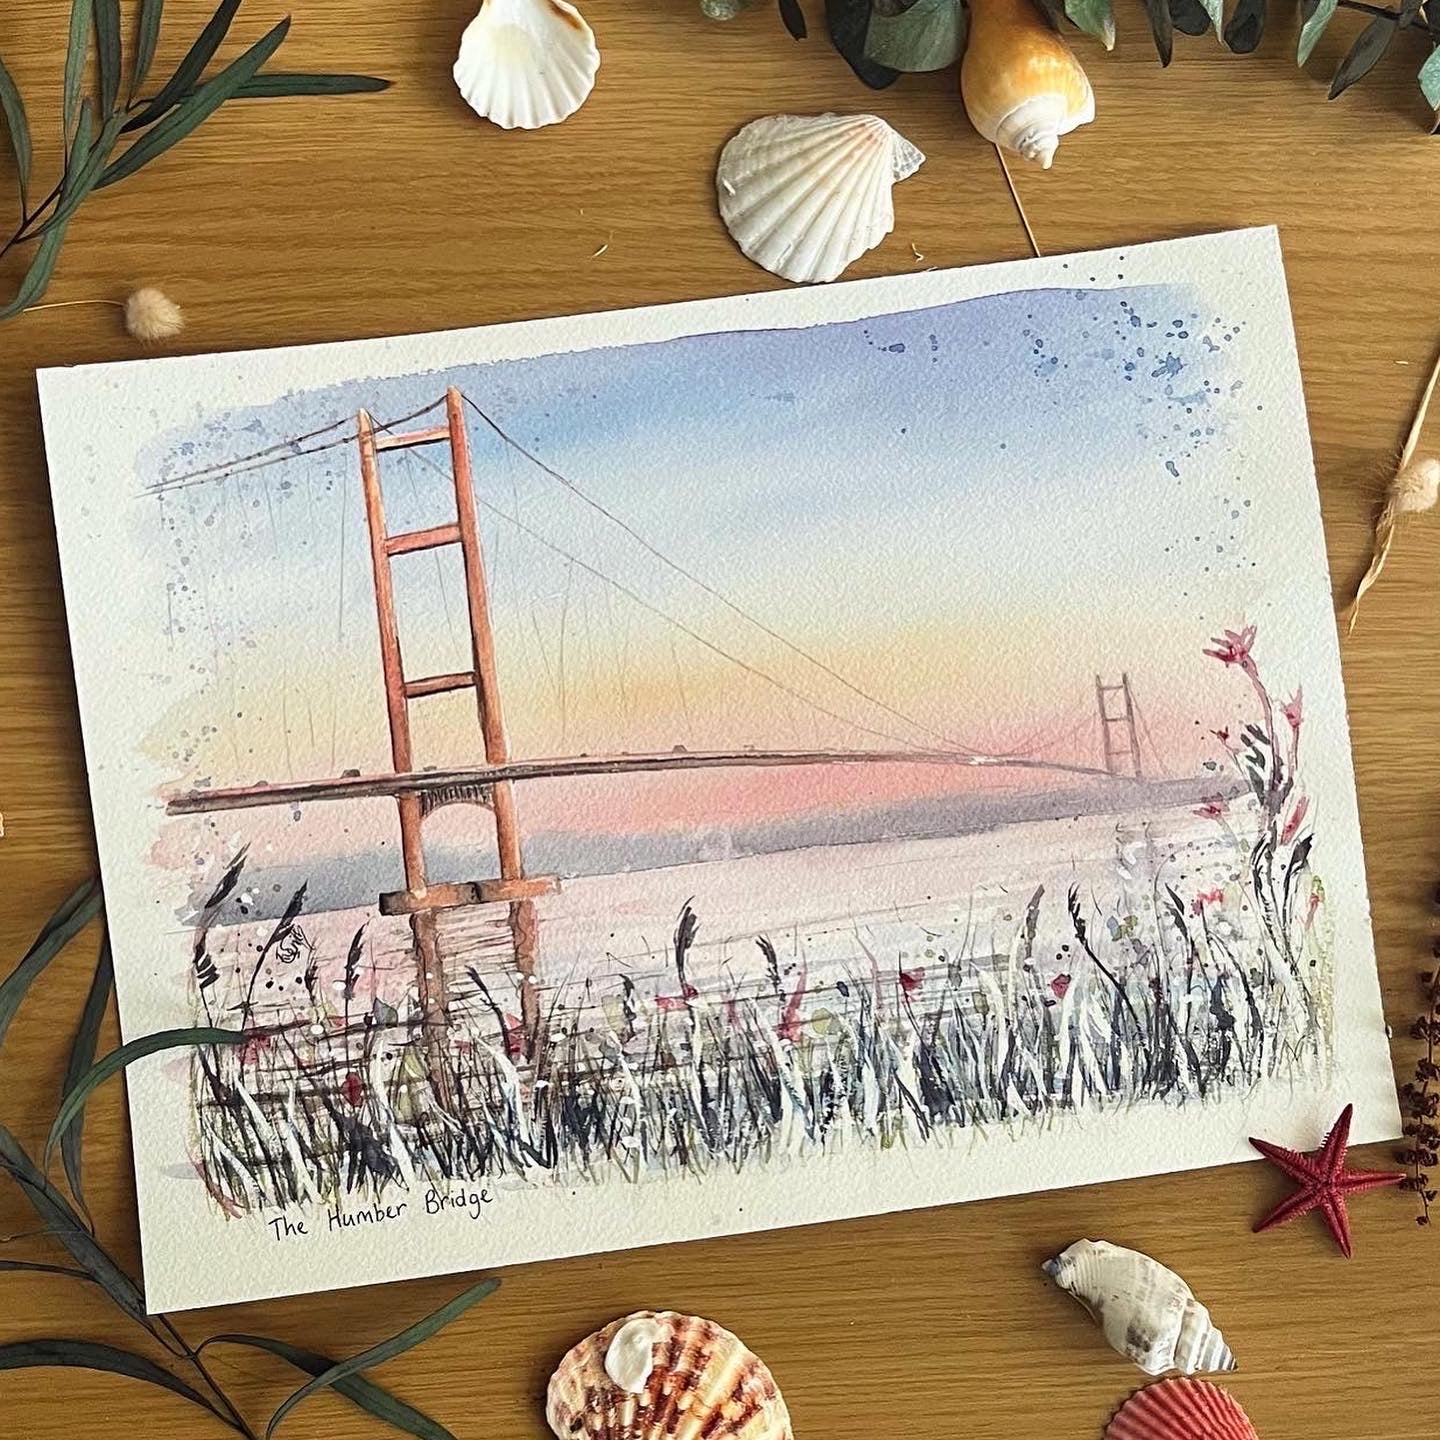 An original watercolour painting by Eve Leoni Smith, featuring the Humber Bridge at sunset with some wildflowers growing in the foreground.